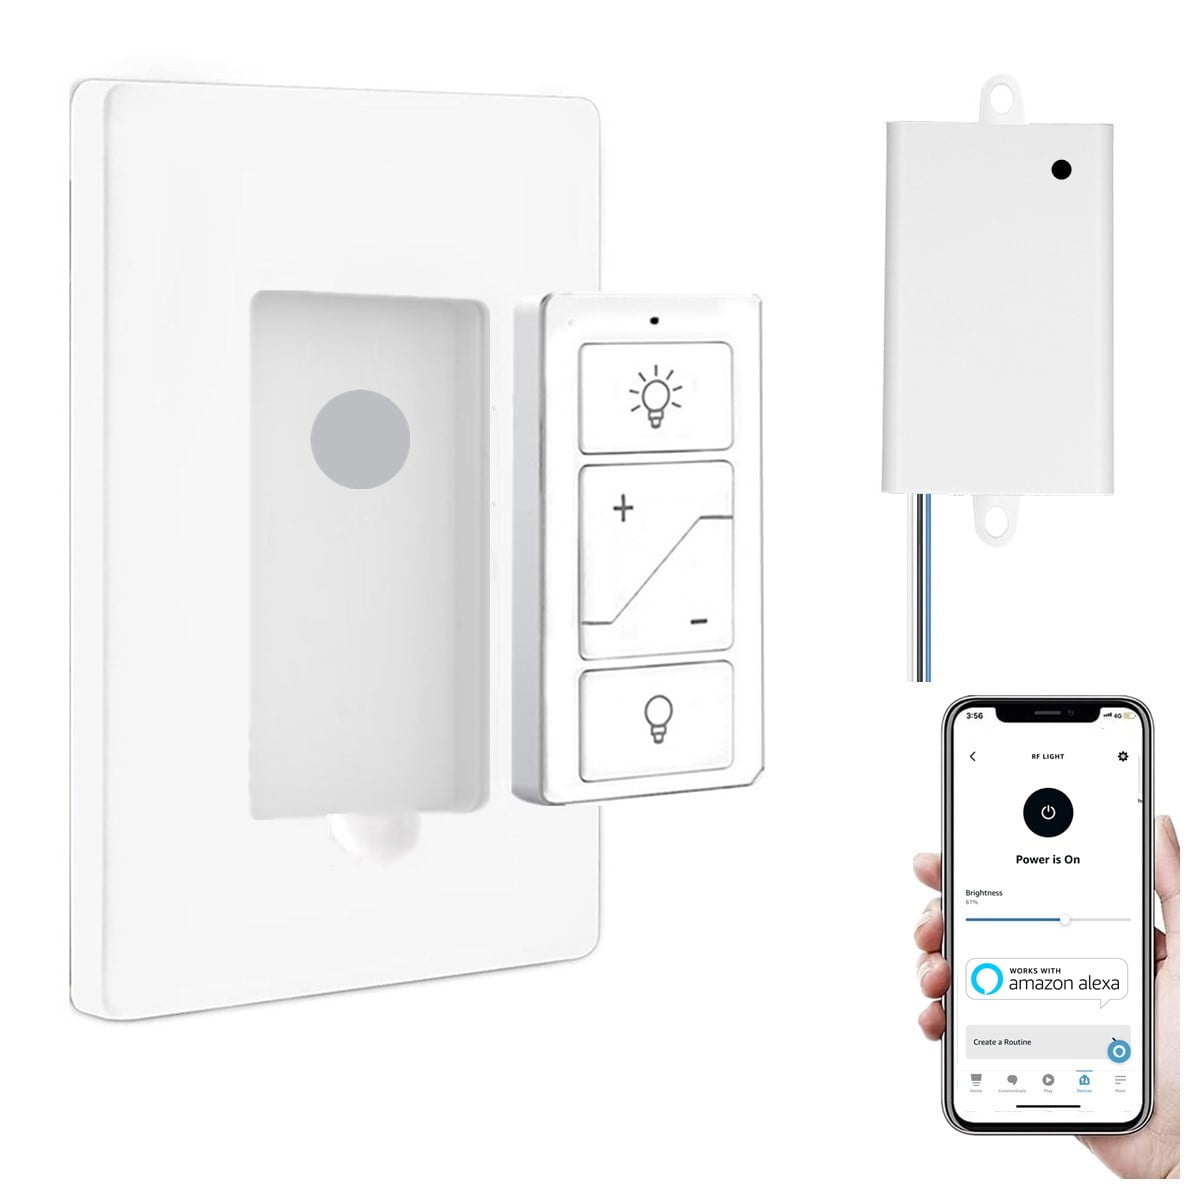 Smart Wireless Light Switch and Receiver Kit,Brightness Adjustable,120ft RF  Range No Wiring Mini Remote Control with Wall Plate,Voice